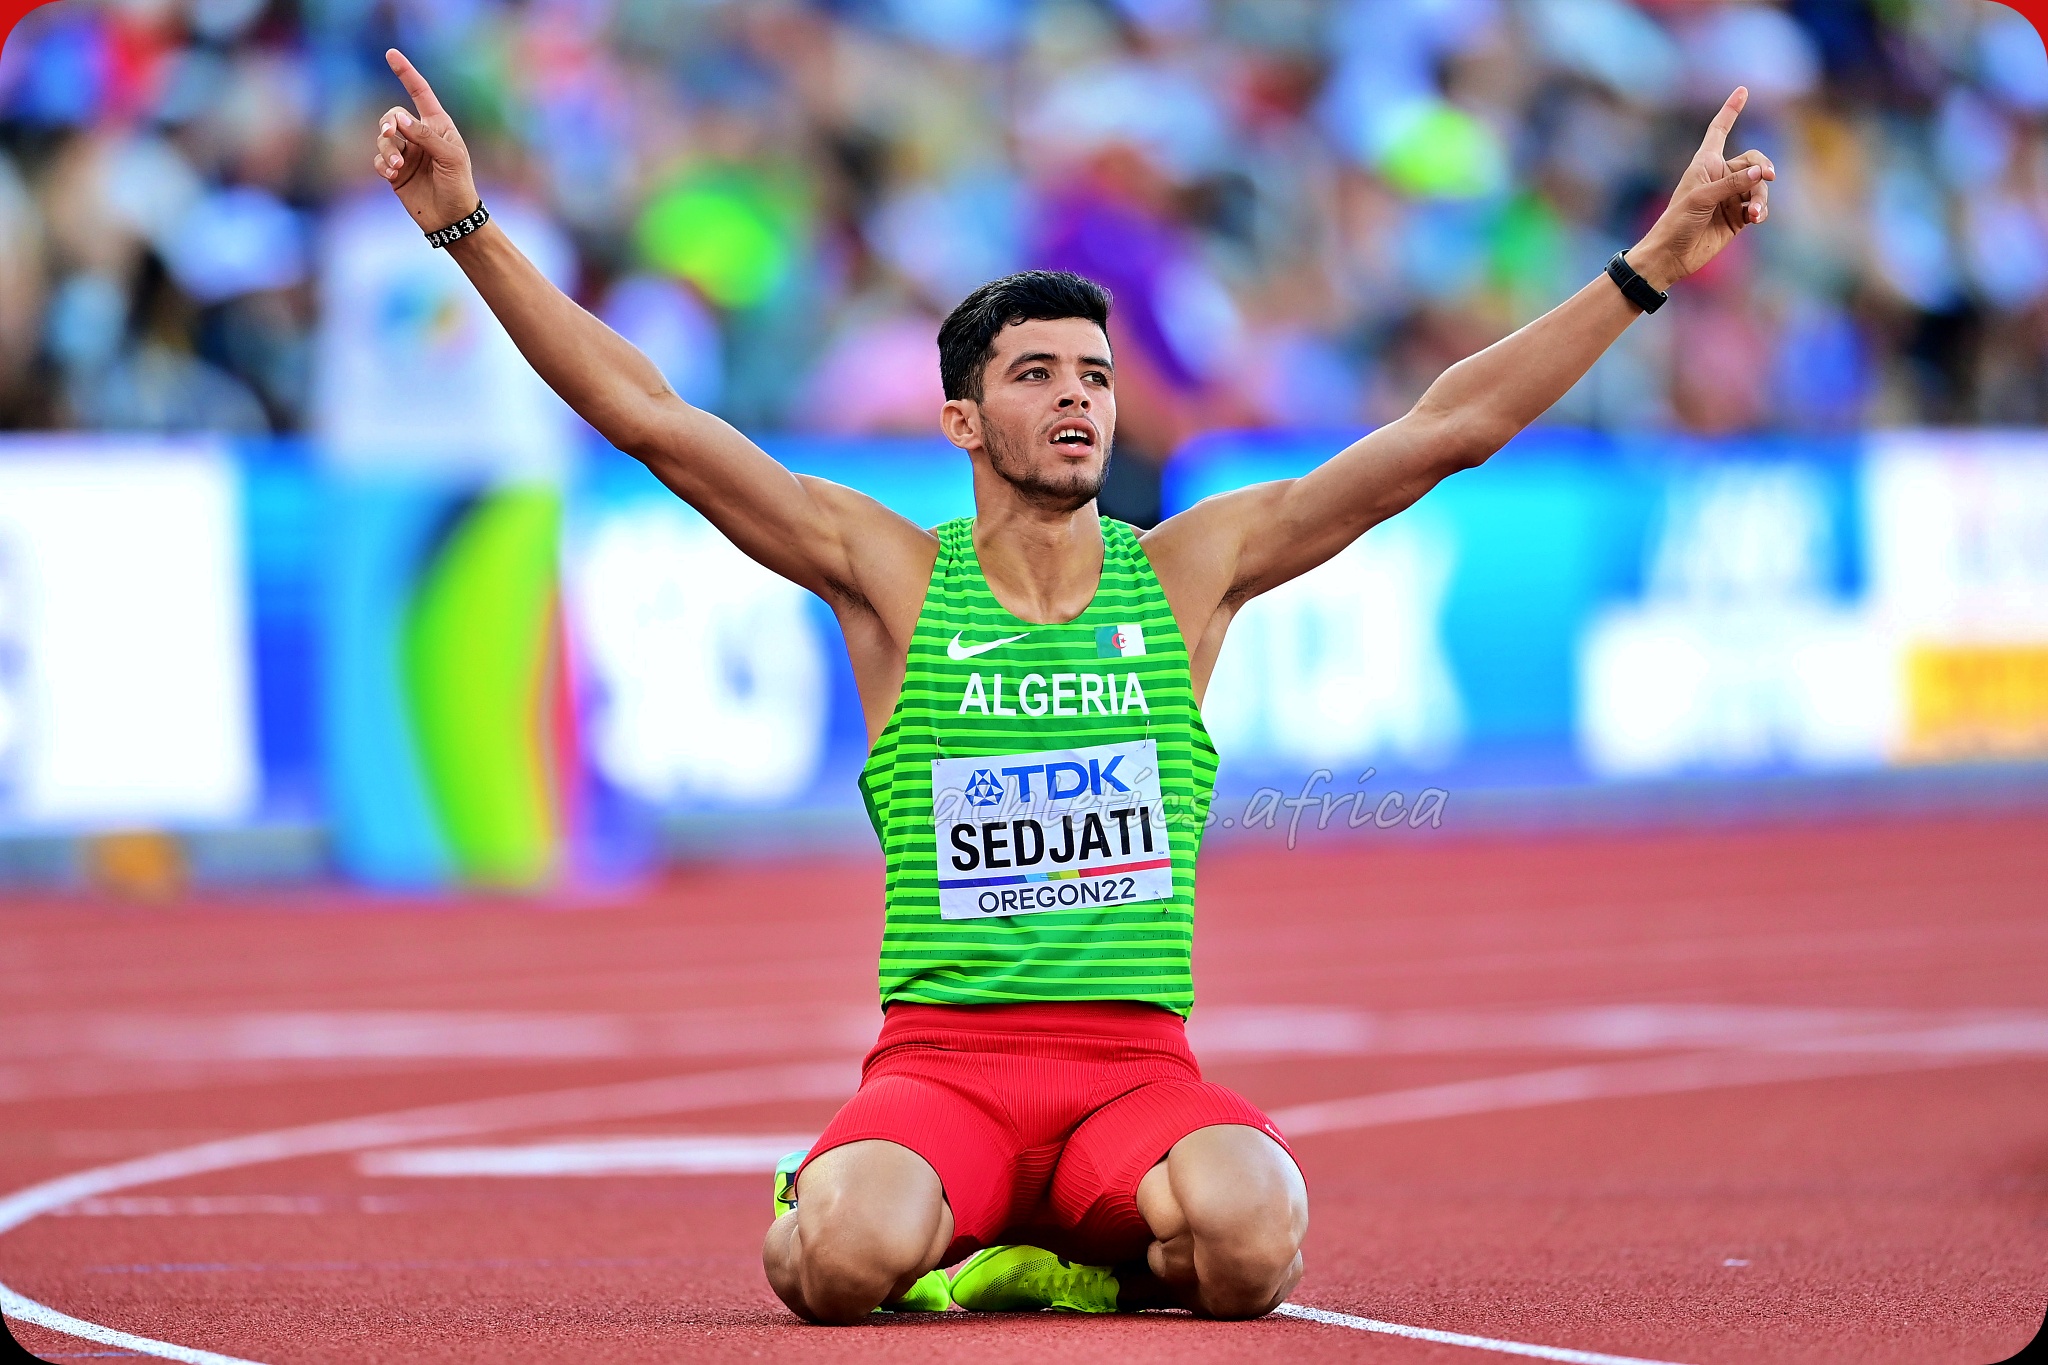 Djamel Sedjati of Team Algeria reacts after competing in the Men's 800m Semi-Final on day seven of the World Athletics Championships Oregon22 at Hayward Field on July 21, 2022 in Eugene, Oregon. (Photo by Hannah Peters/Getty Images for World Athletics)